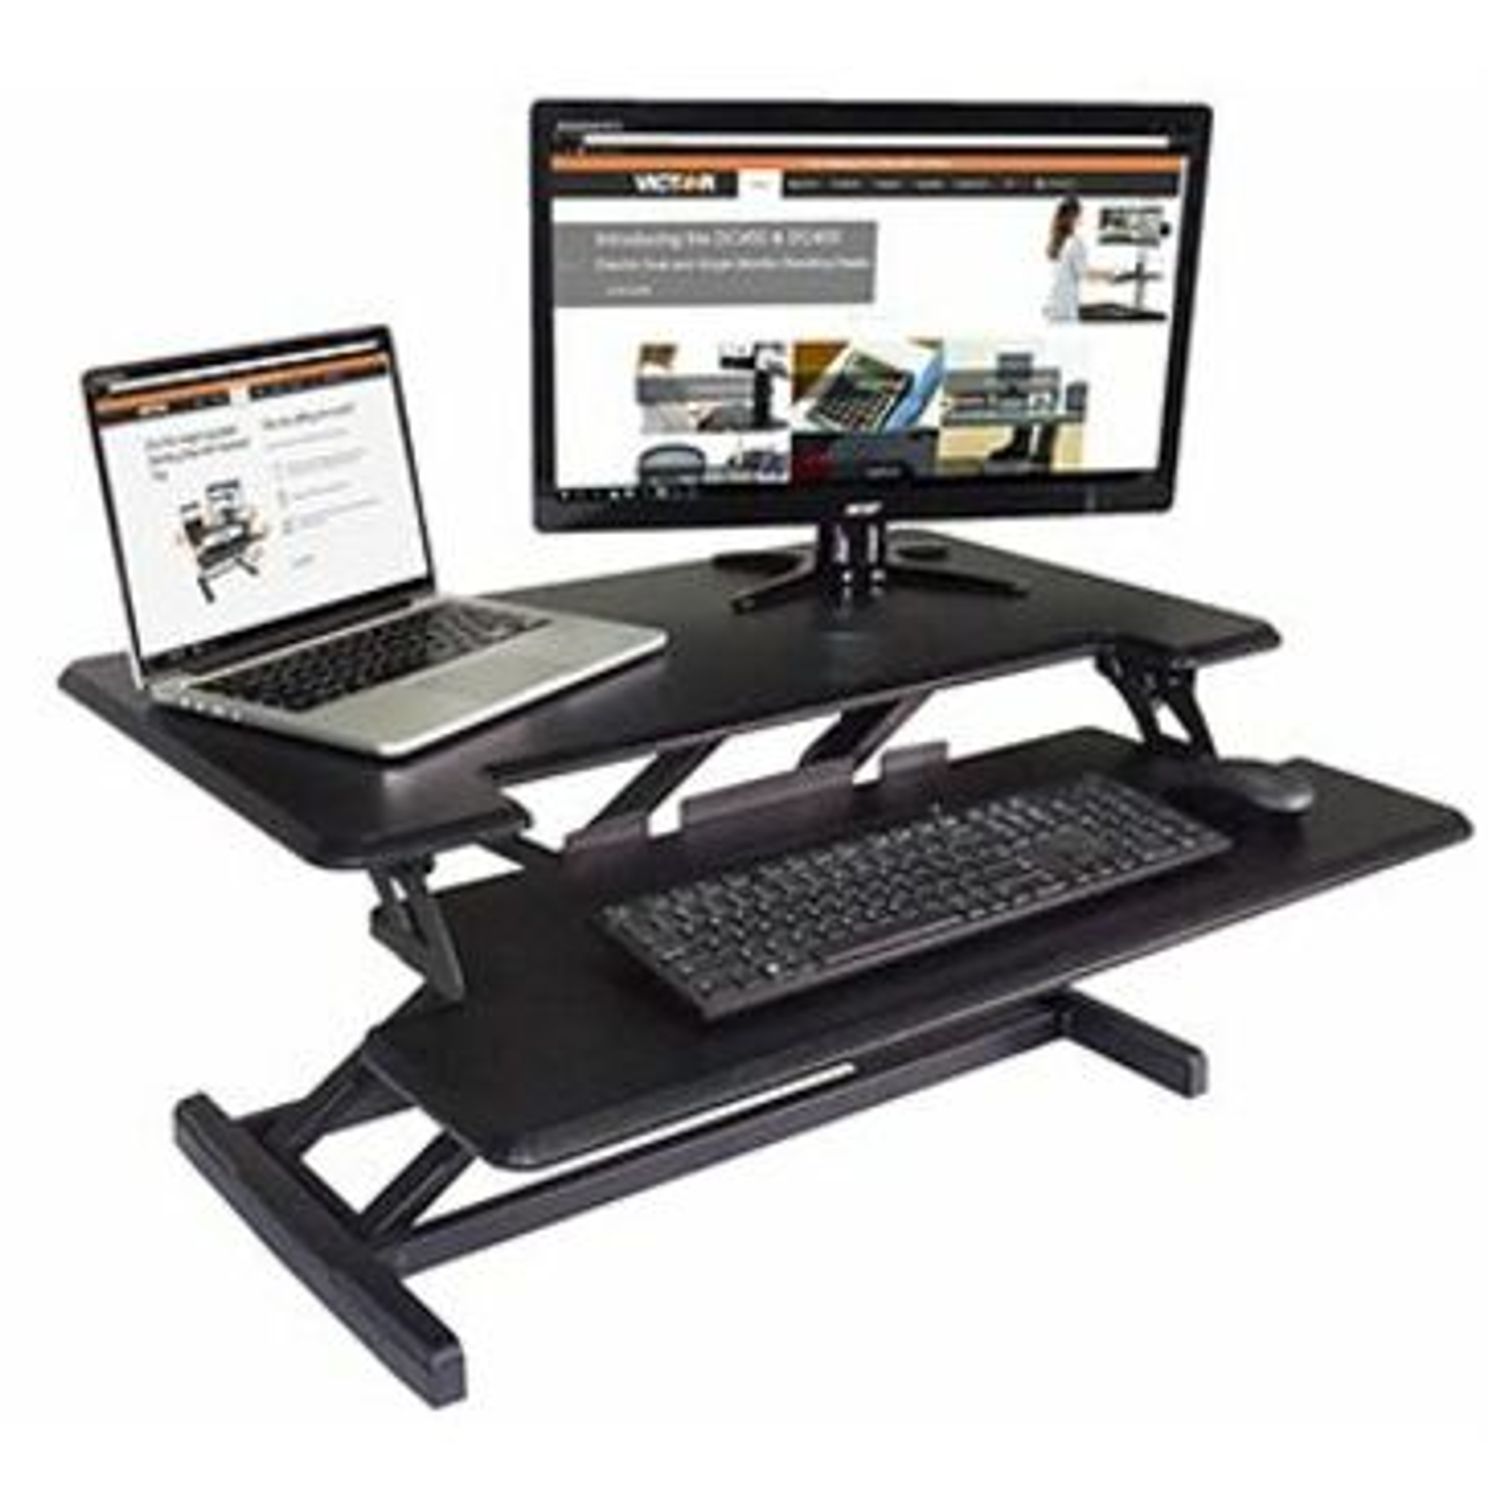 High Rise Height Adjustable Compact Standing Desk with Keyboard Tray 19" Height x 32.5" Width x 18" Depth, Standing Desk Converter, Compact for 24" Standard Desk or Table, Wood, Laminate, Steel